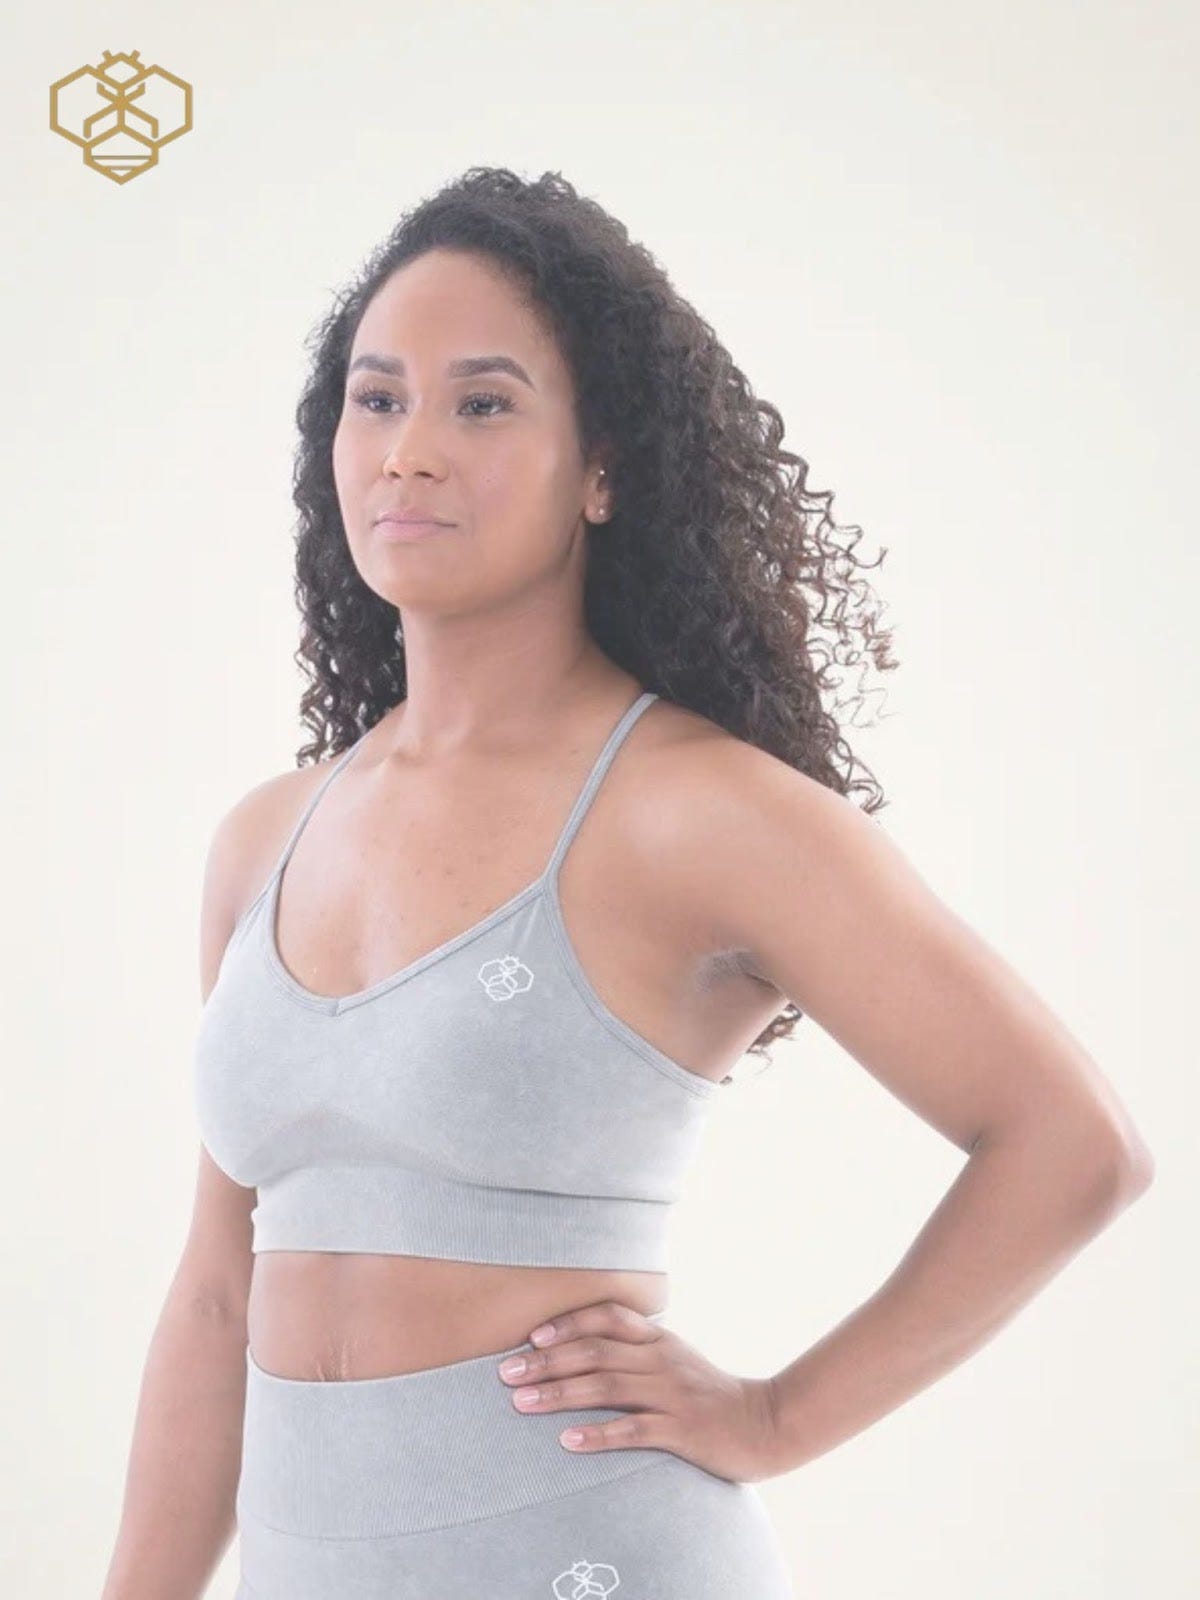 Women's Gym & Workout Clothes. Workout Clothes, by Athletic Bee